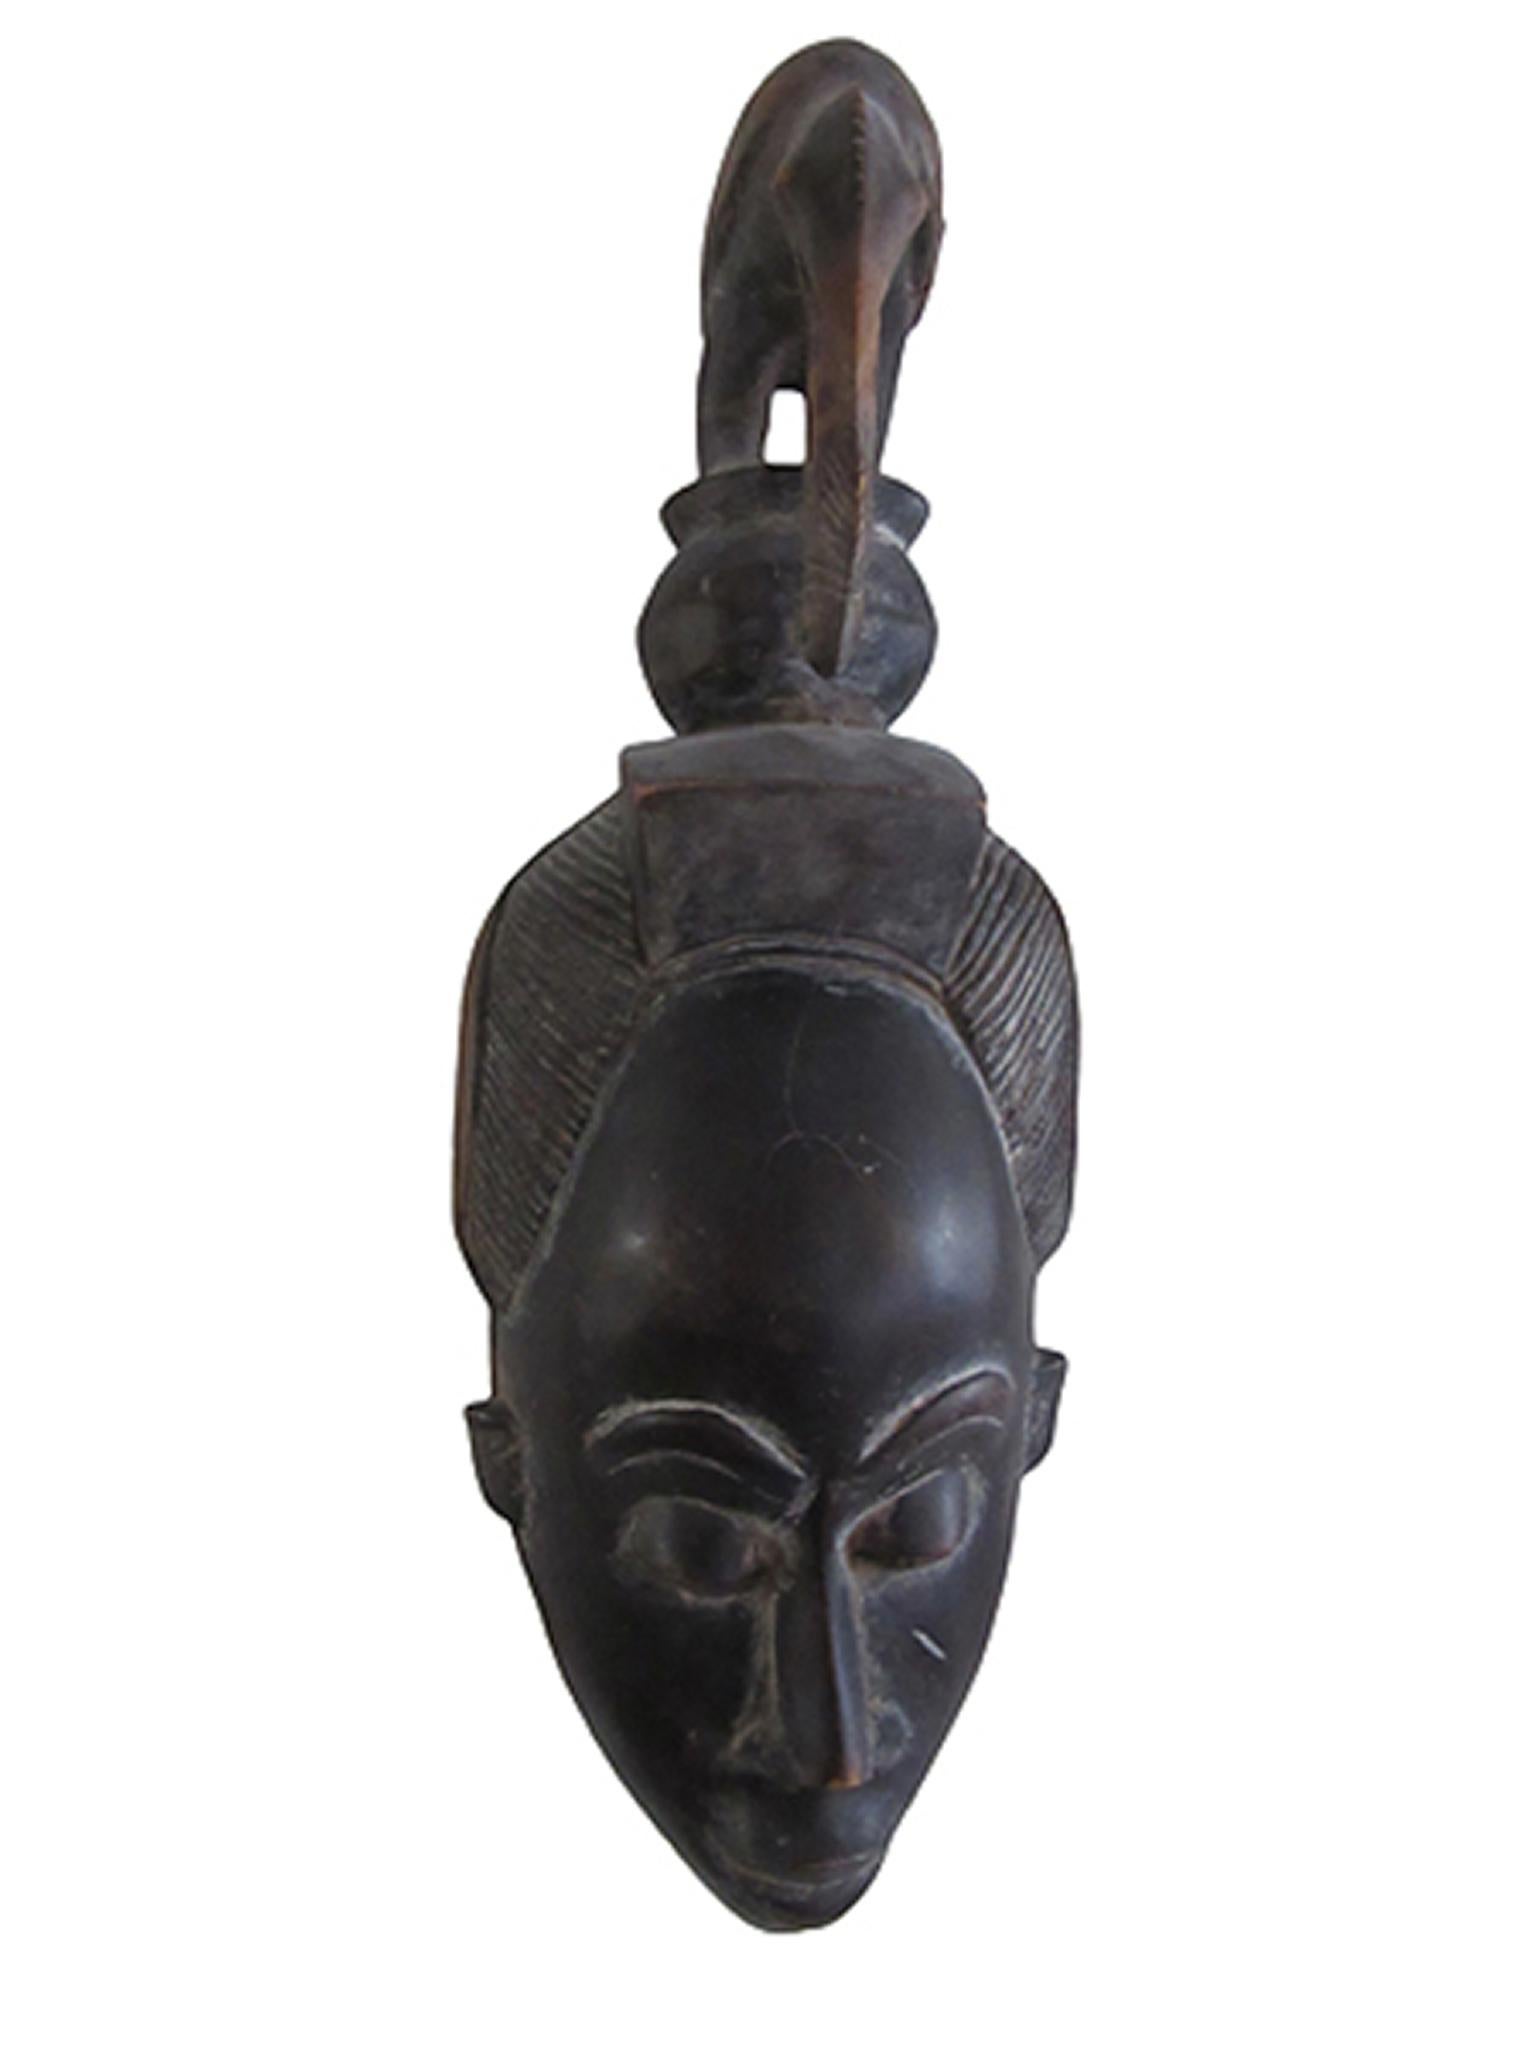 Unknown Figurative Sculpture - "Dance Mask, " Carved Wood created c. 1965